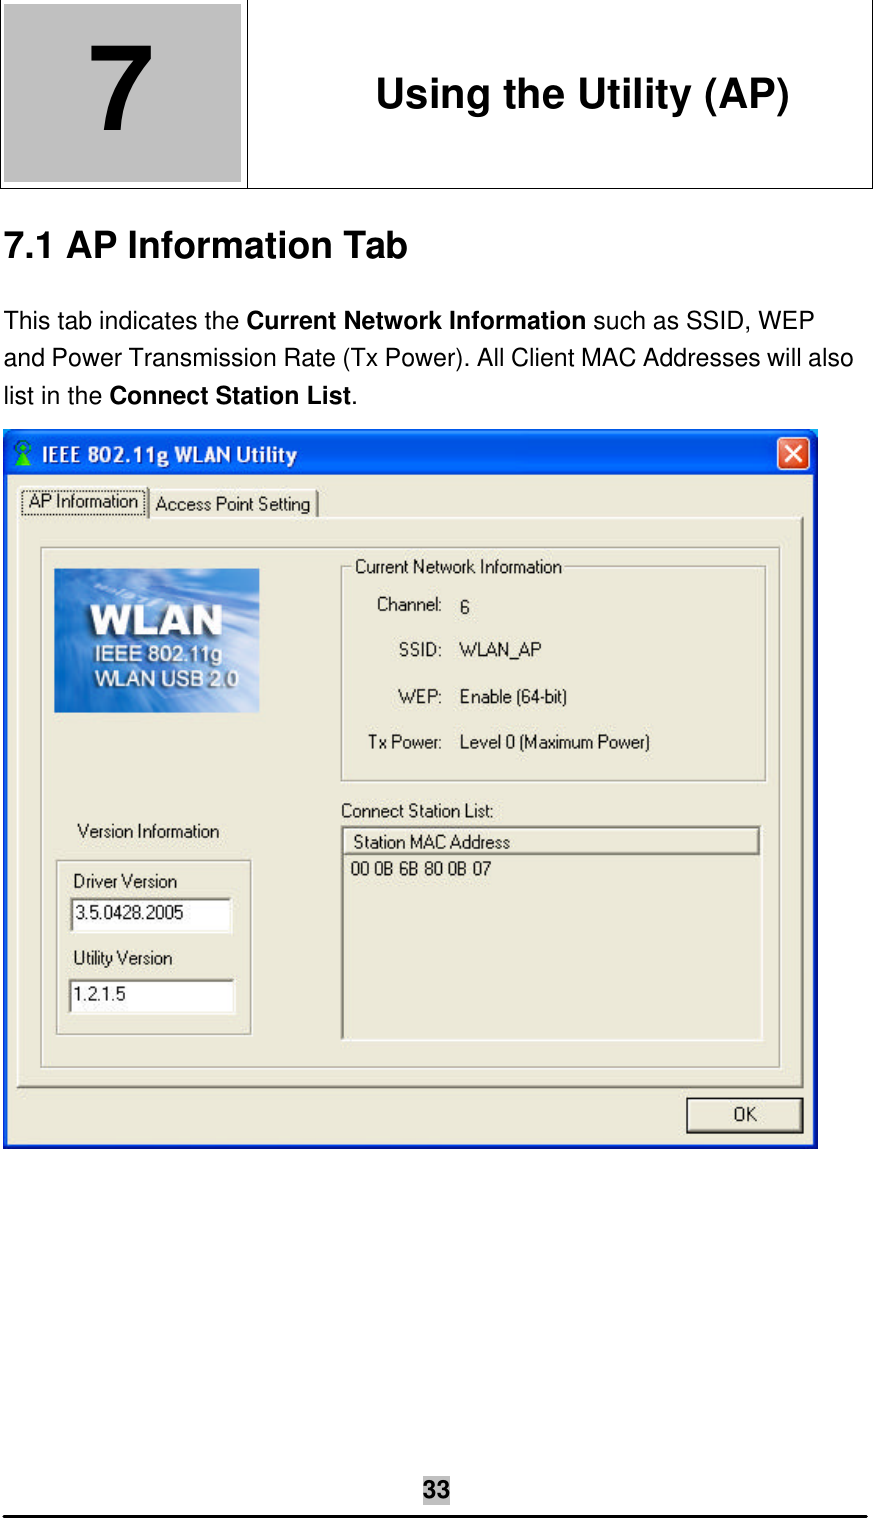   33 7  7. Using the Utility (AP) 7.1 AP Information Tab This tab indicates the Current Network Information such as SSID, WEP and Power Transmission Rate (Tx Power). All Client MAC Addresses will also list in the Connect Station List.  